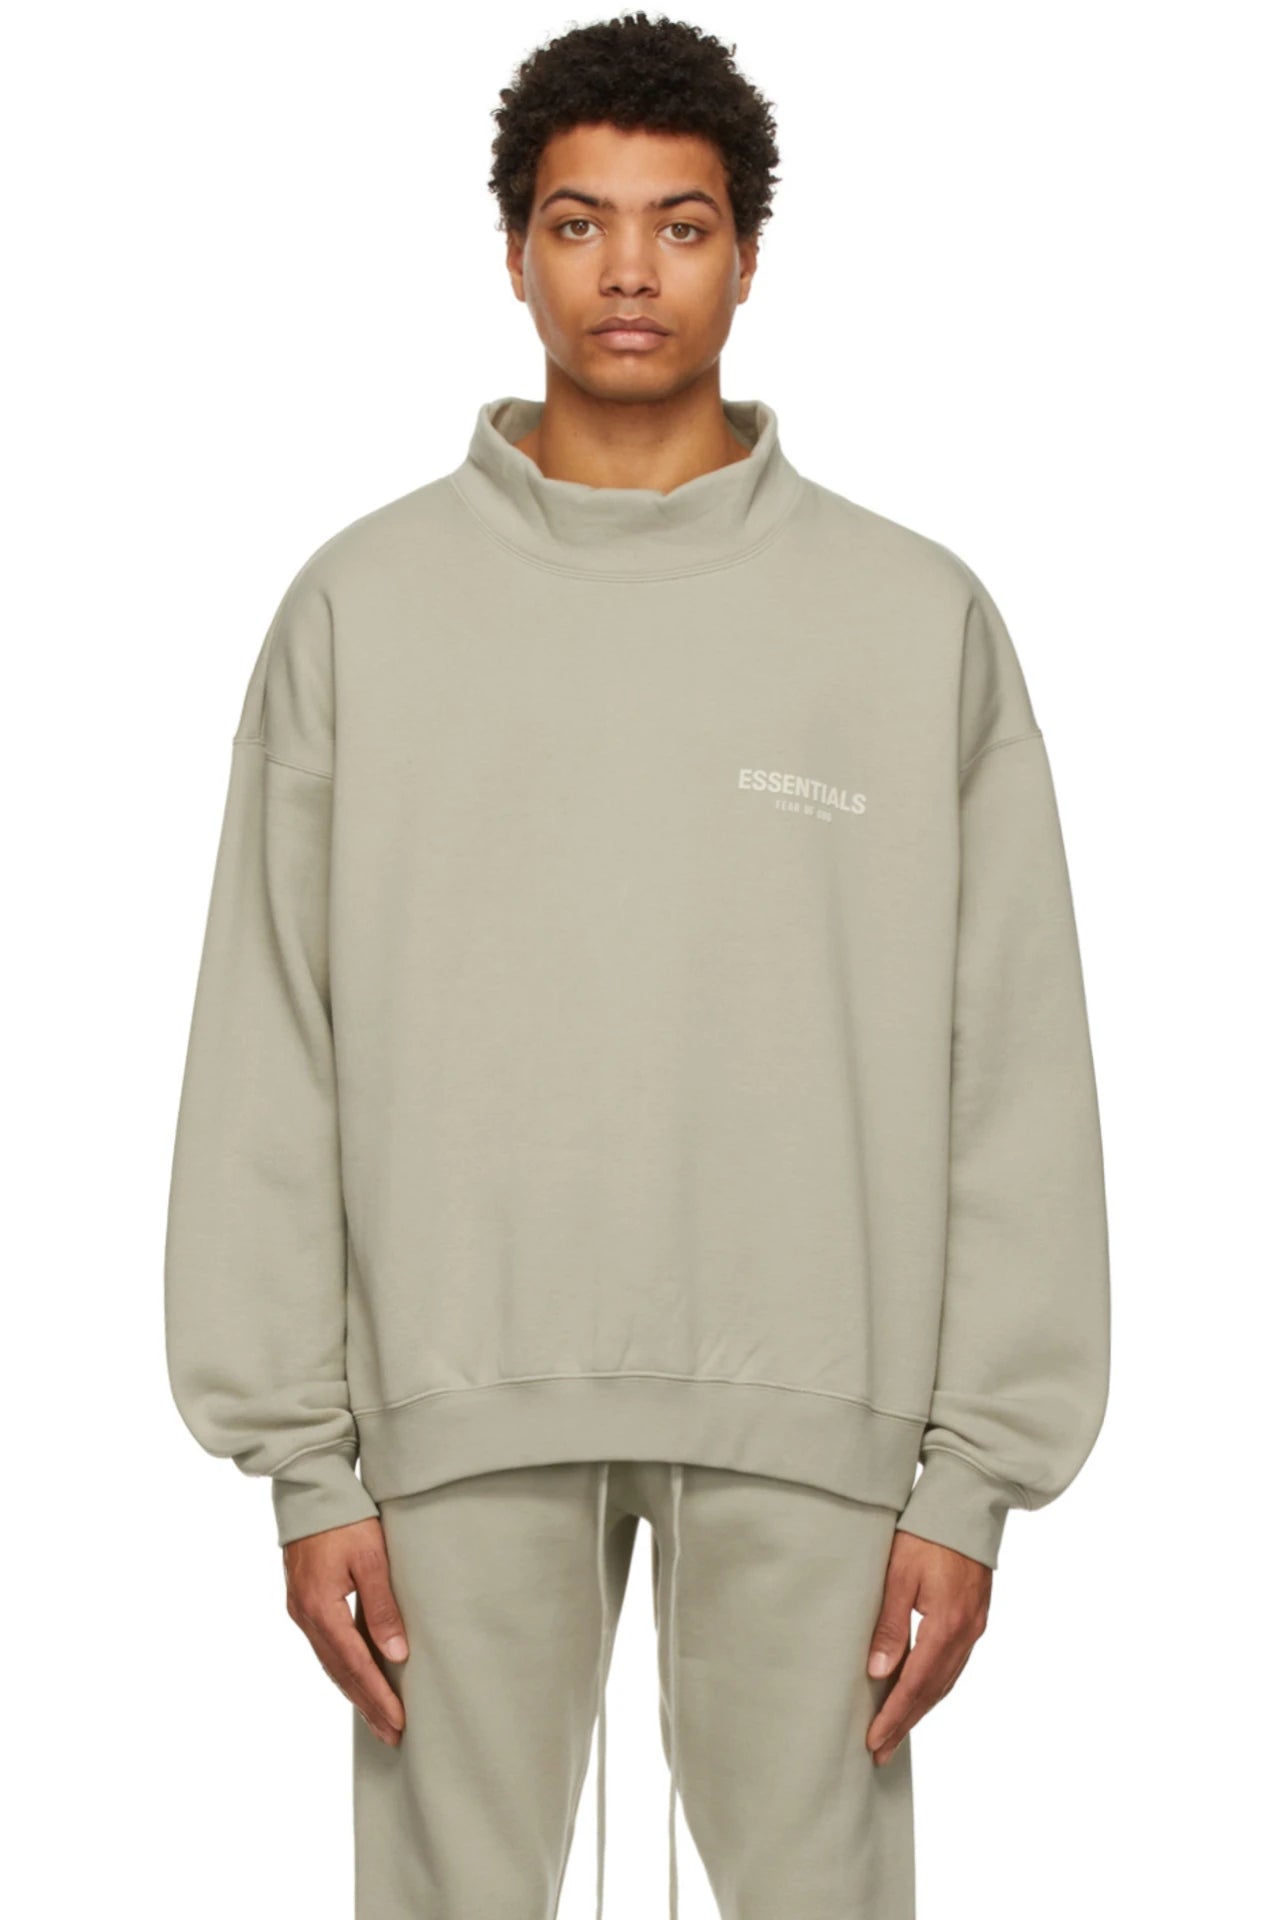 Fear of God Essentials Mock Neck Sweater Olive Green – SoleMate Sneakers